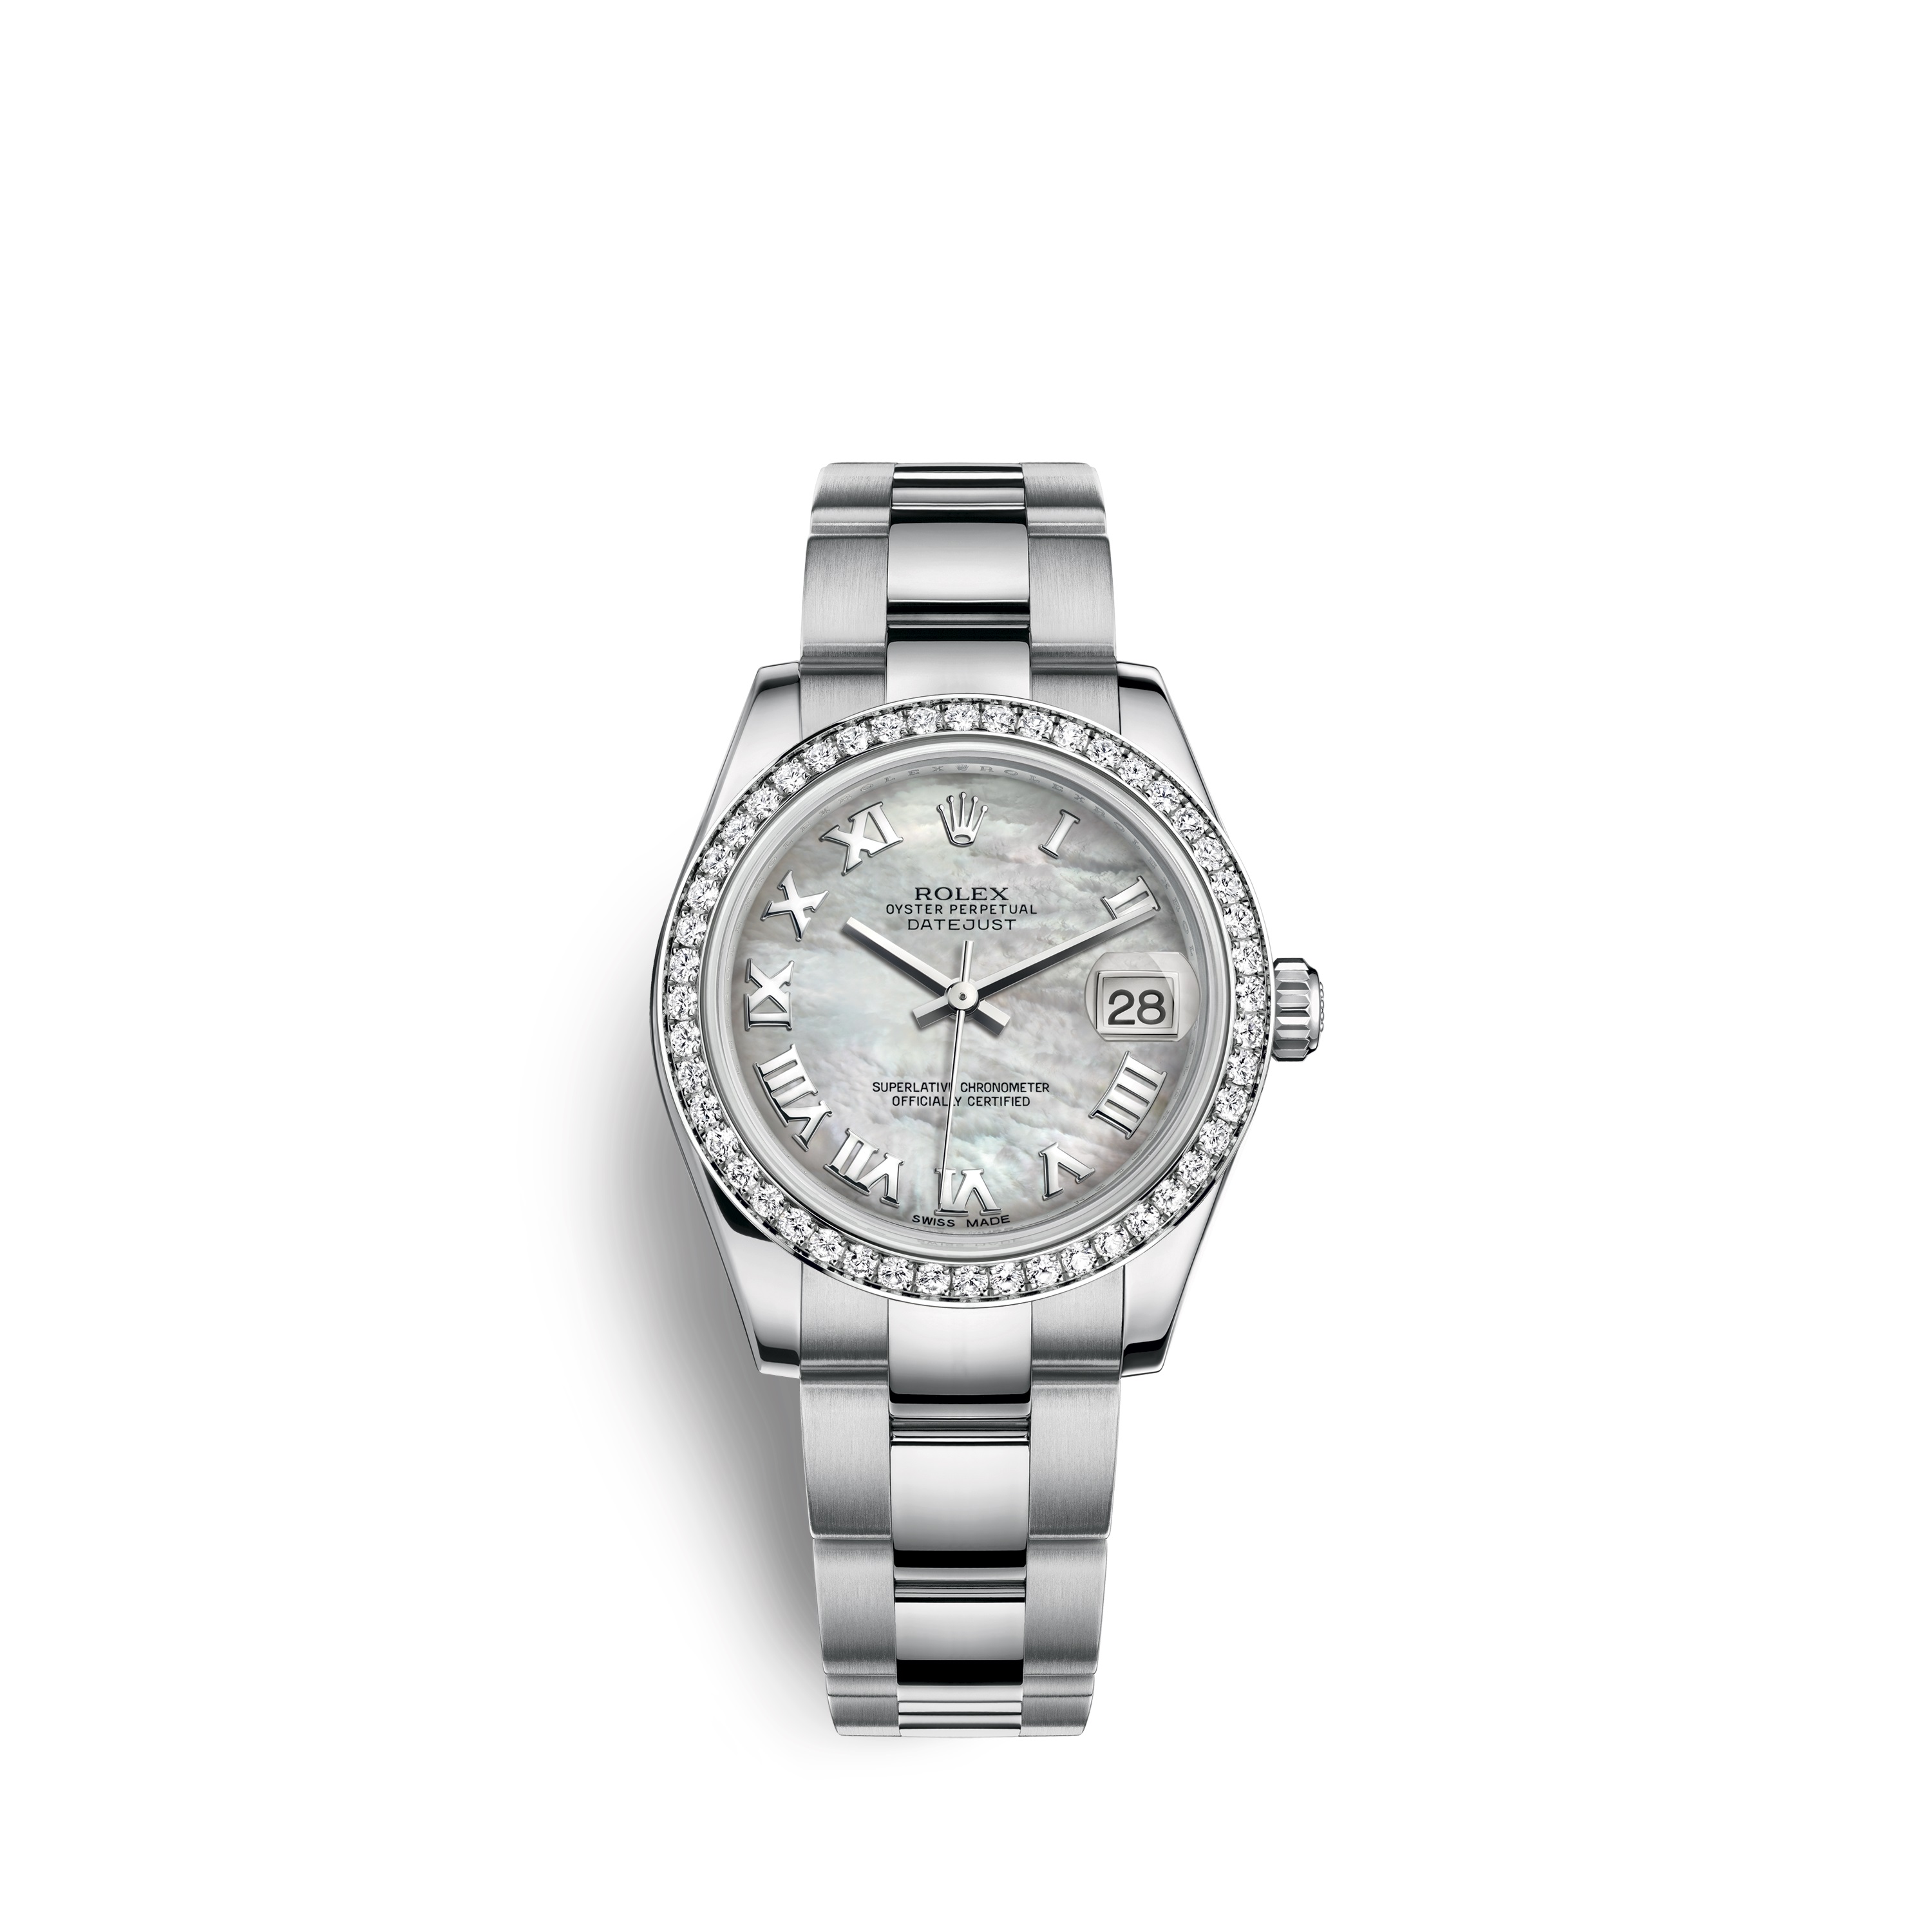 Datejust 31 178384 White Gold & Diamonds Watch (White Mother-of-Pearl)